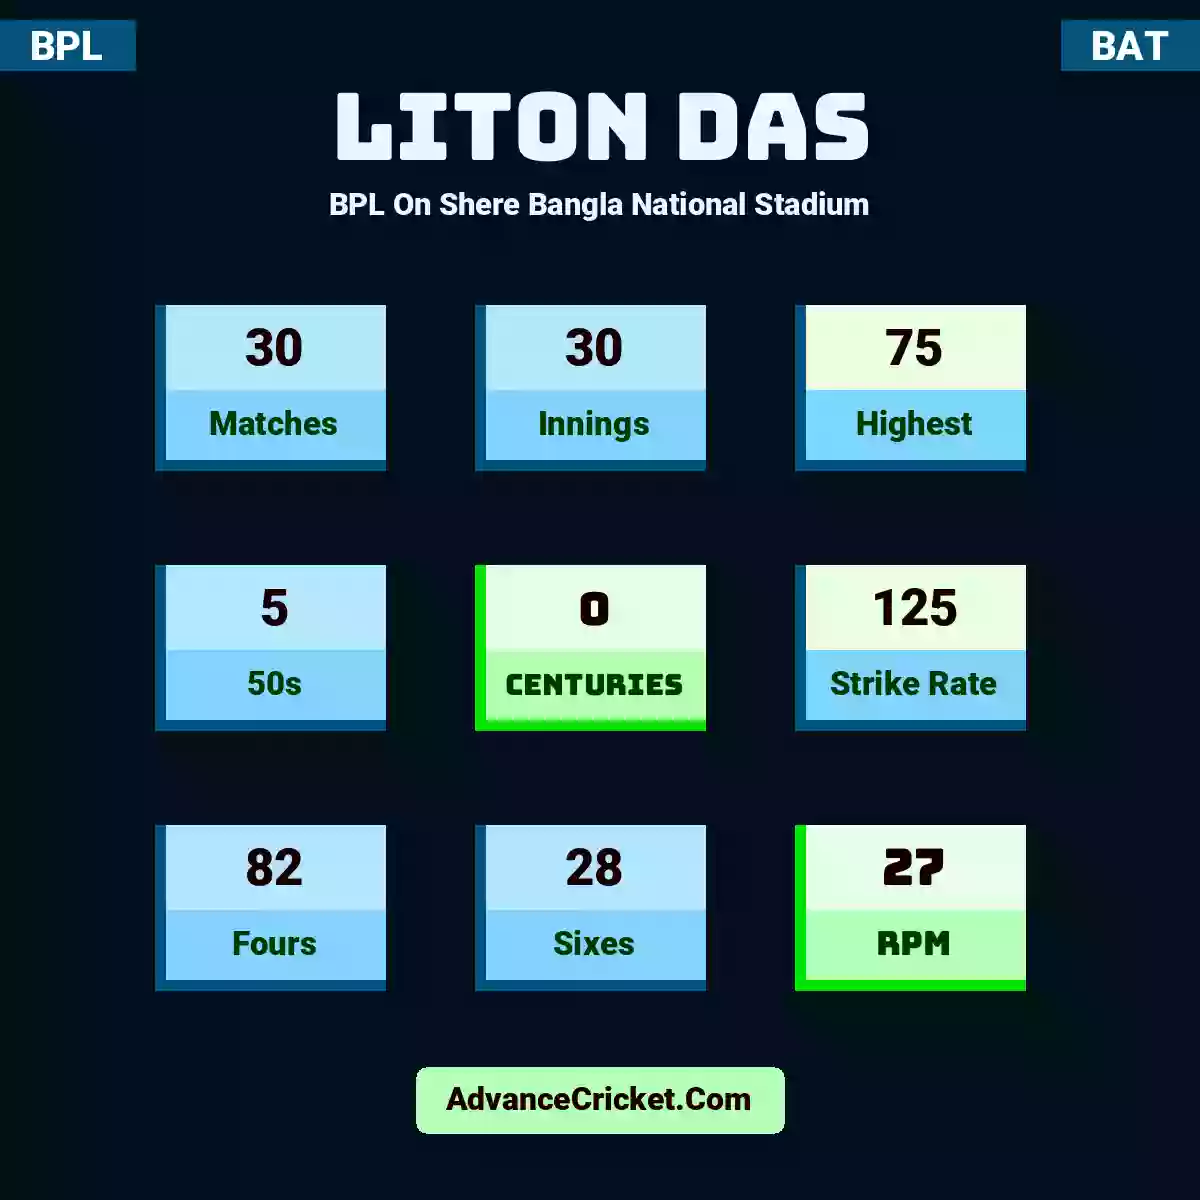 Liton Das BPL  On Shere Bangla National Stadium, Liton Das played 30 matches, scored 75 runs as highest, 5 half-centuries, and 0 centuries, with a strike rate of 125. L.Das hit 82 fours and 28 sixes, with an RPM of 27.